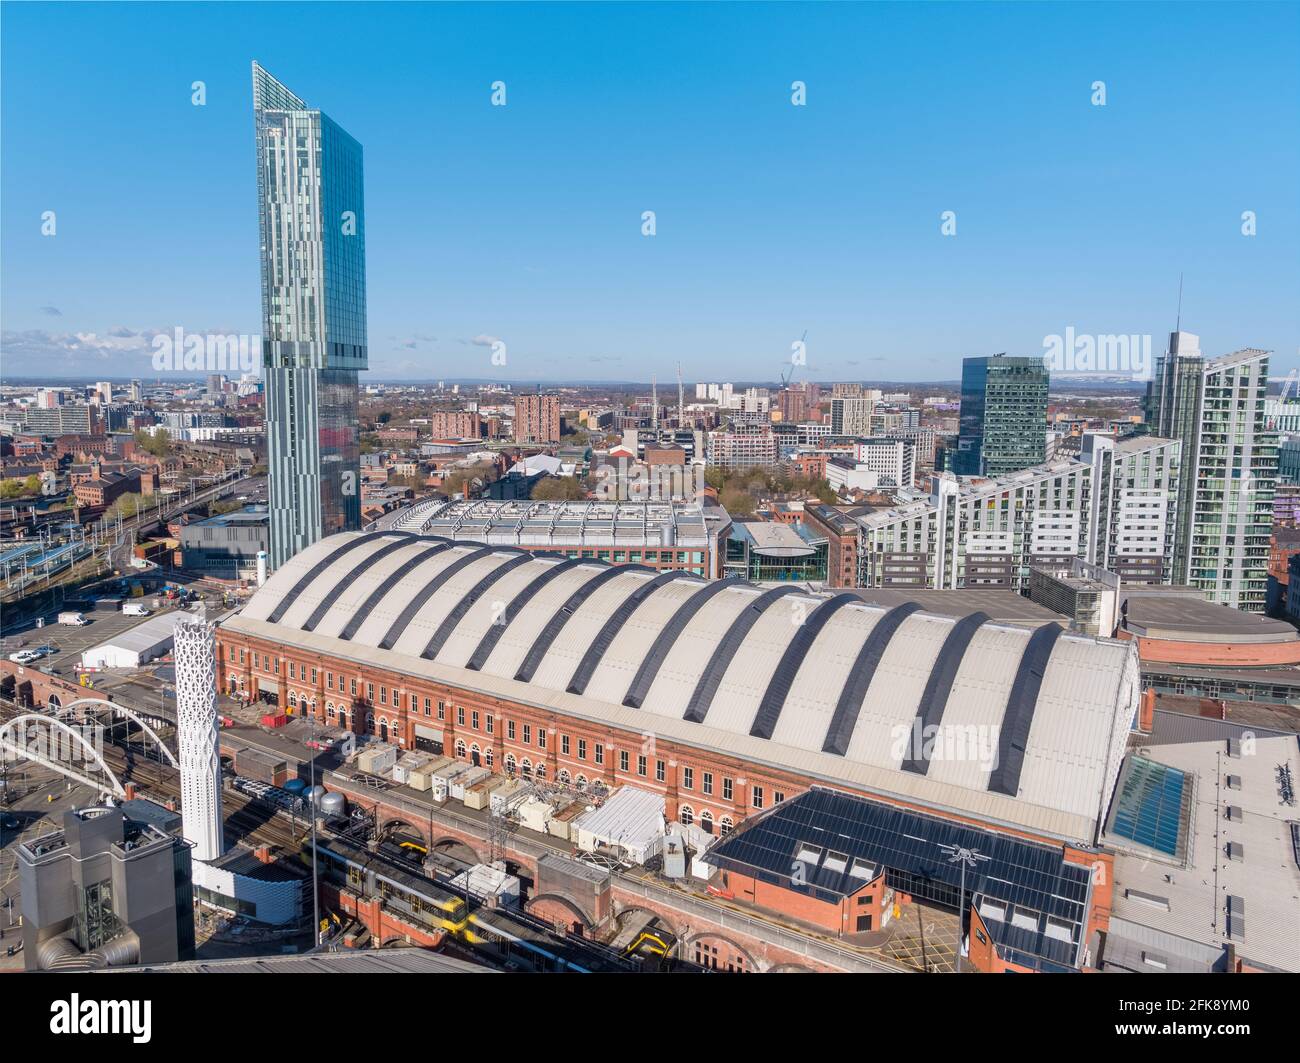 Aerial drone photography of Manchester city centre on a sunny day including Beetham Tower, Deansgate Square, Manchester Central, AXIS Tower Stock Photo